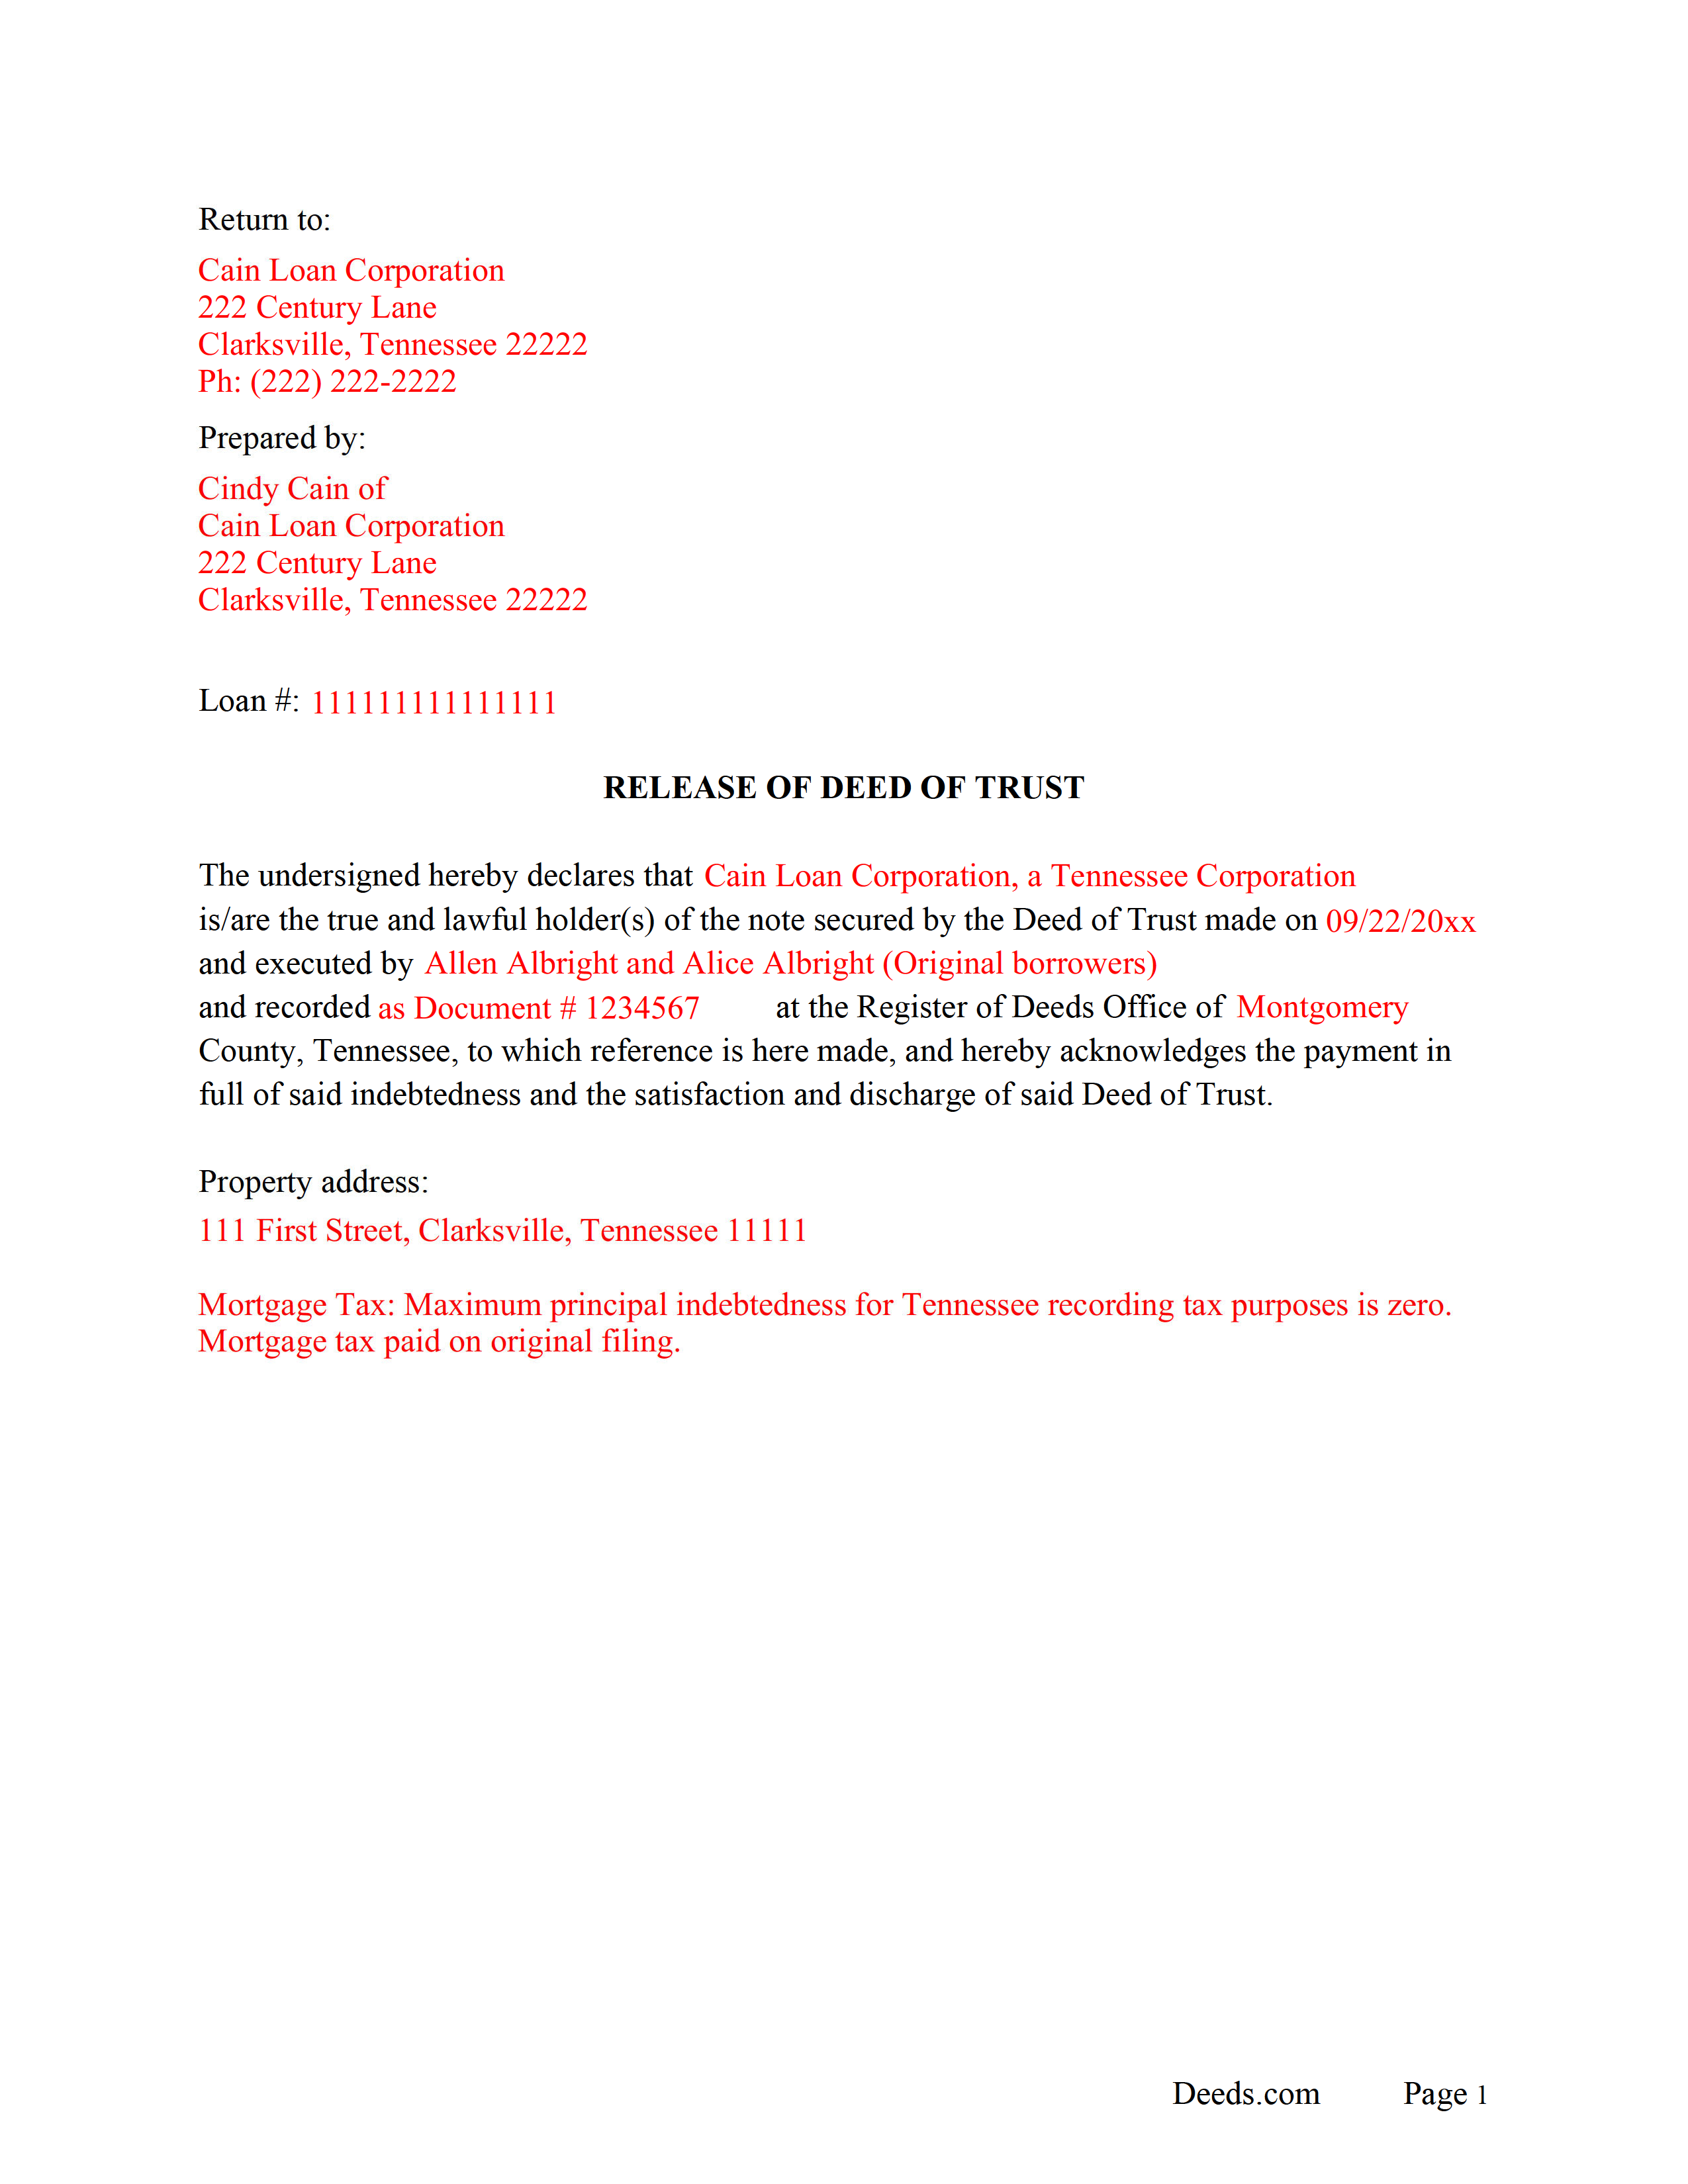 Completed Example of the Release of Deed of Trust Document